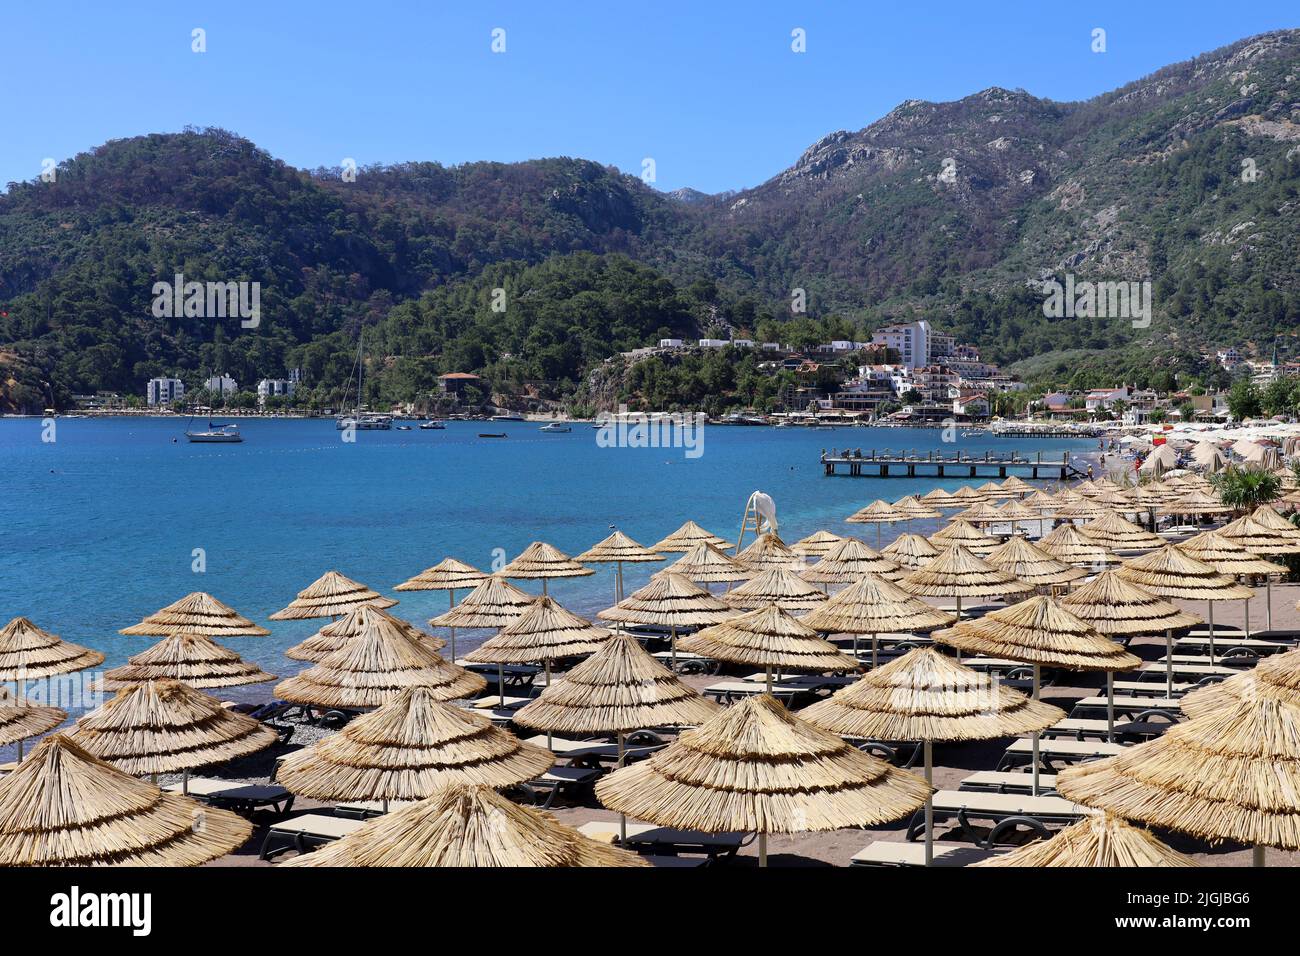 View to azure bay and beach hotels surrounded by green mountains. Summer resort with wicker parasols and lounge chairs in Mediterranean sea Stock Photo